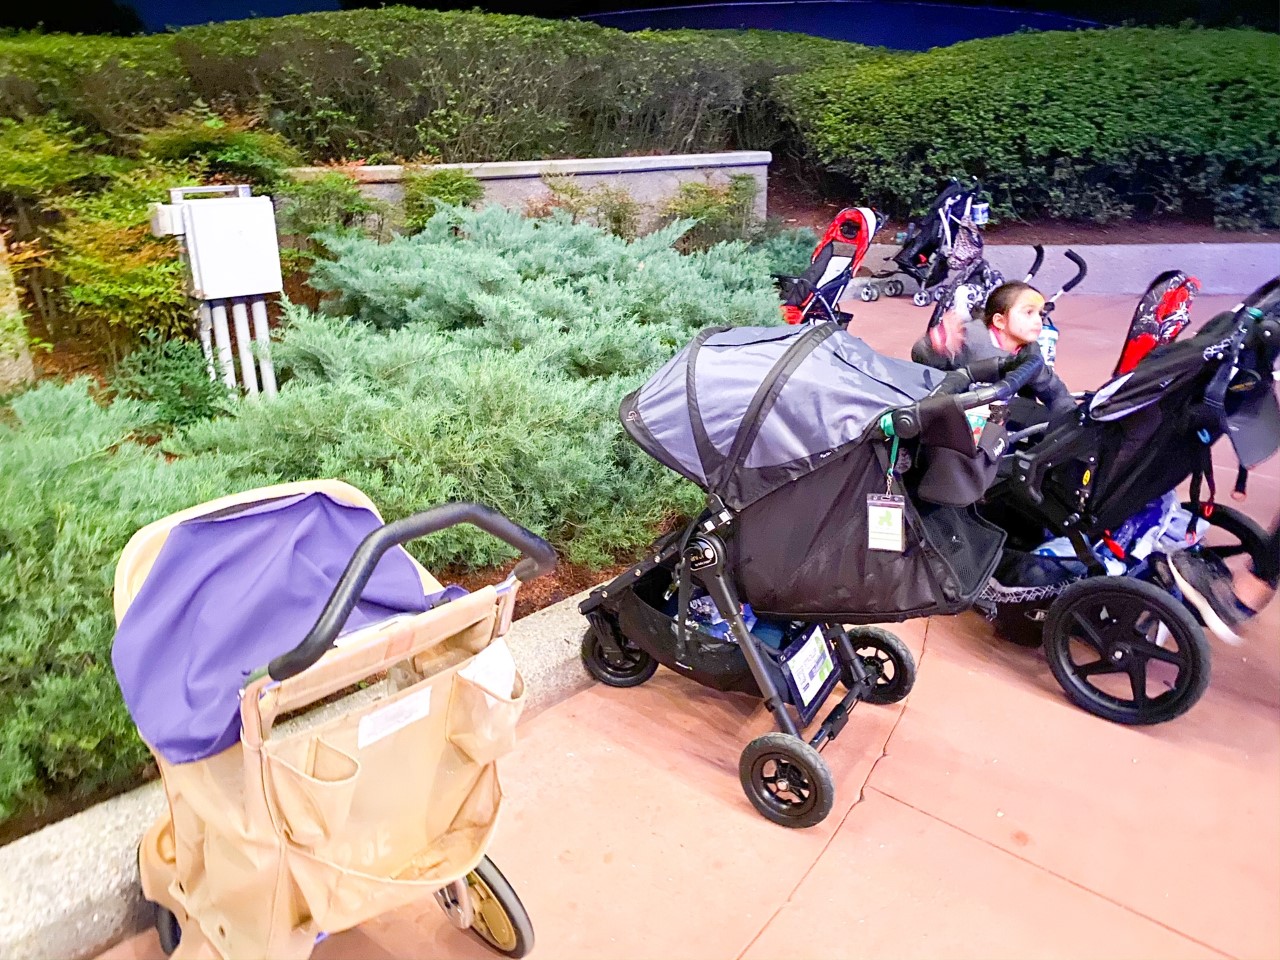 When considering strollers at Disney, make sure to know things, like where to park your strollers, as shown in this photo.